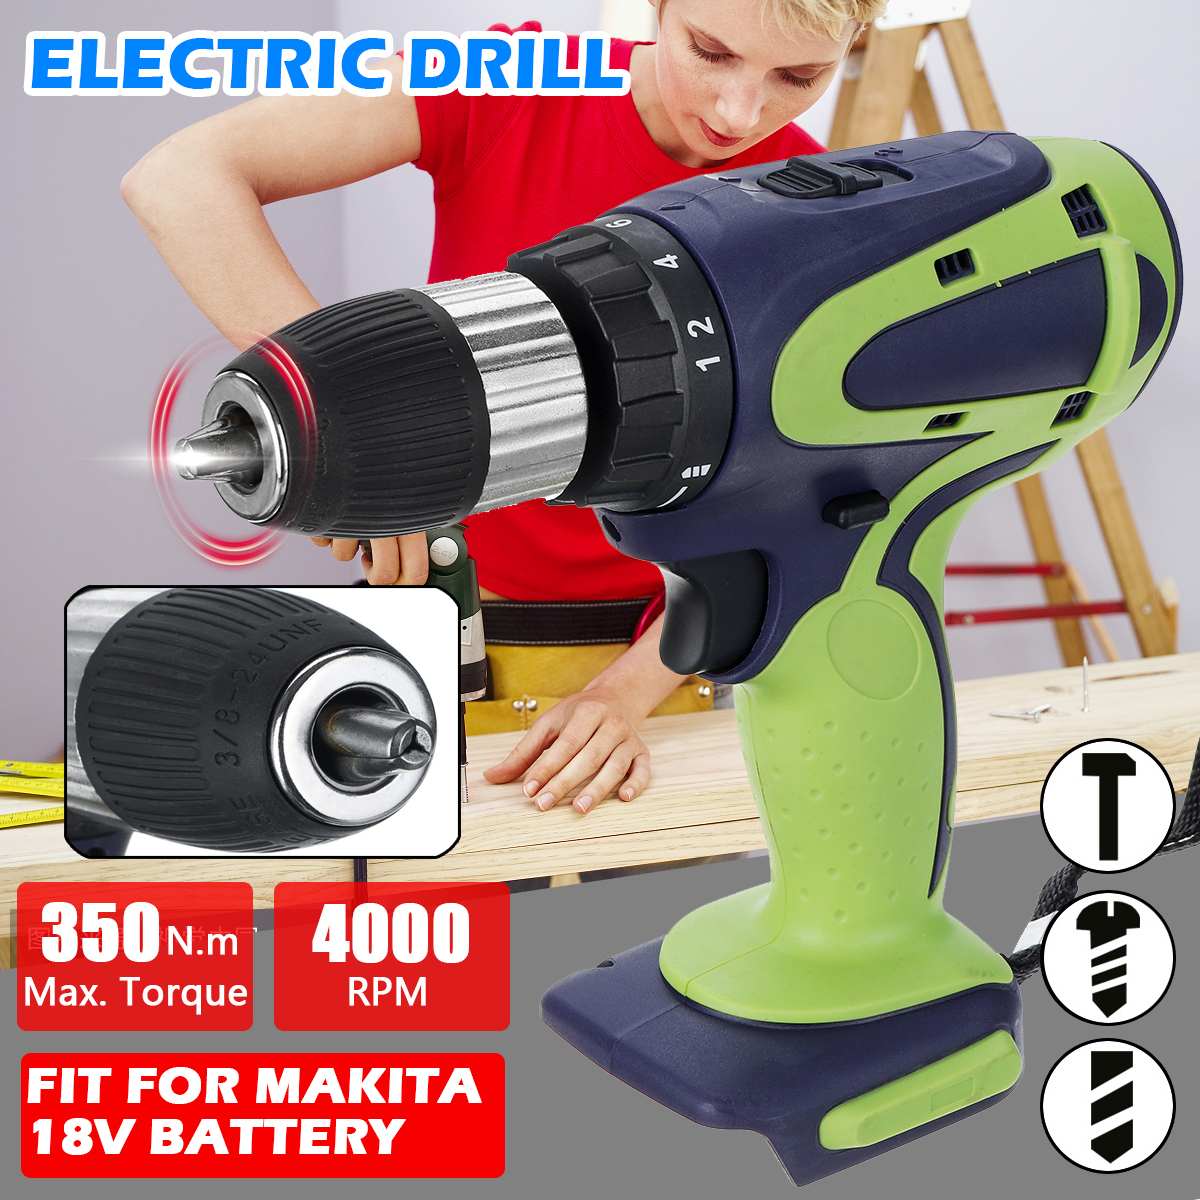 13mm-Chuck-Cordless-Electric-Drill-For-Makita-18V-Battery-4000RPM-LED-Light-Power-Drills-350Nm-1642844-1